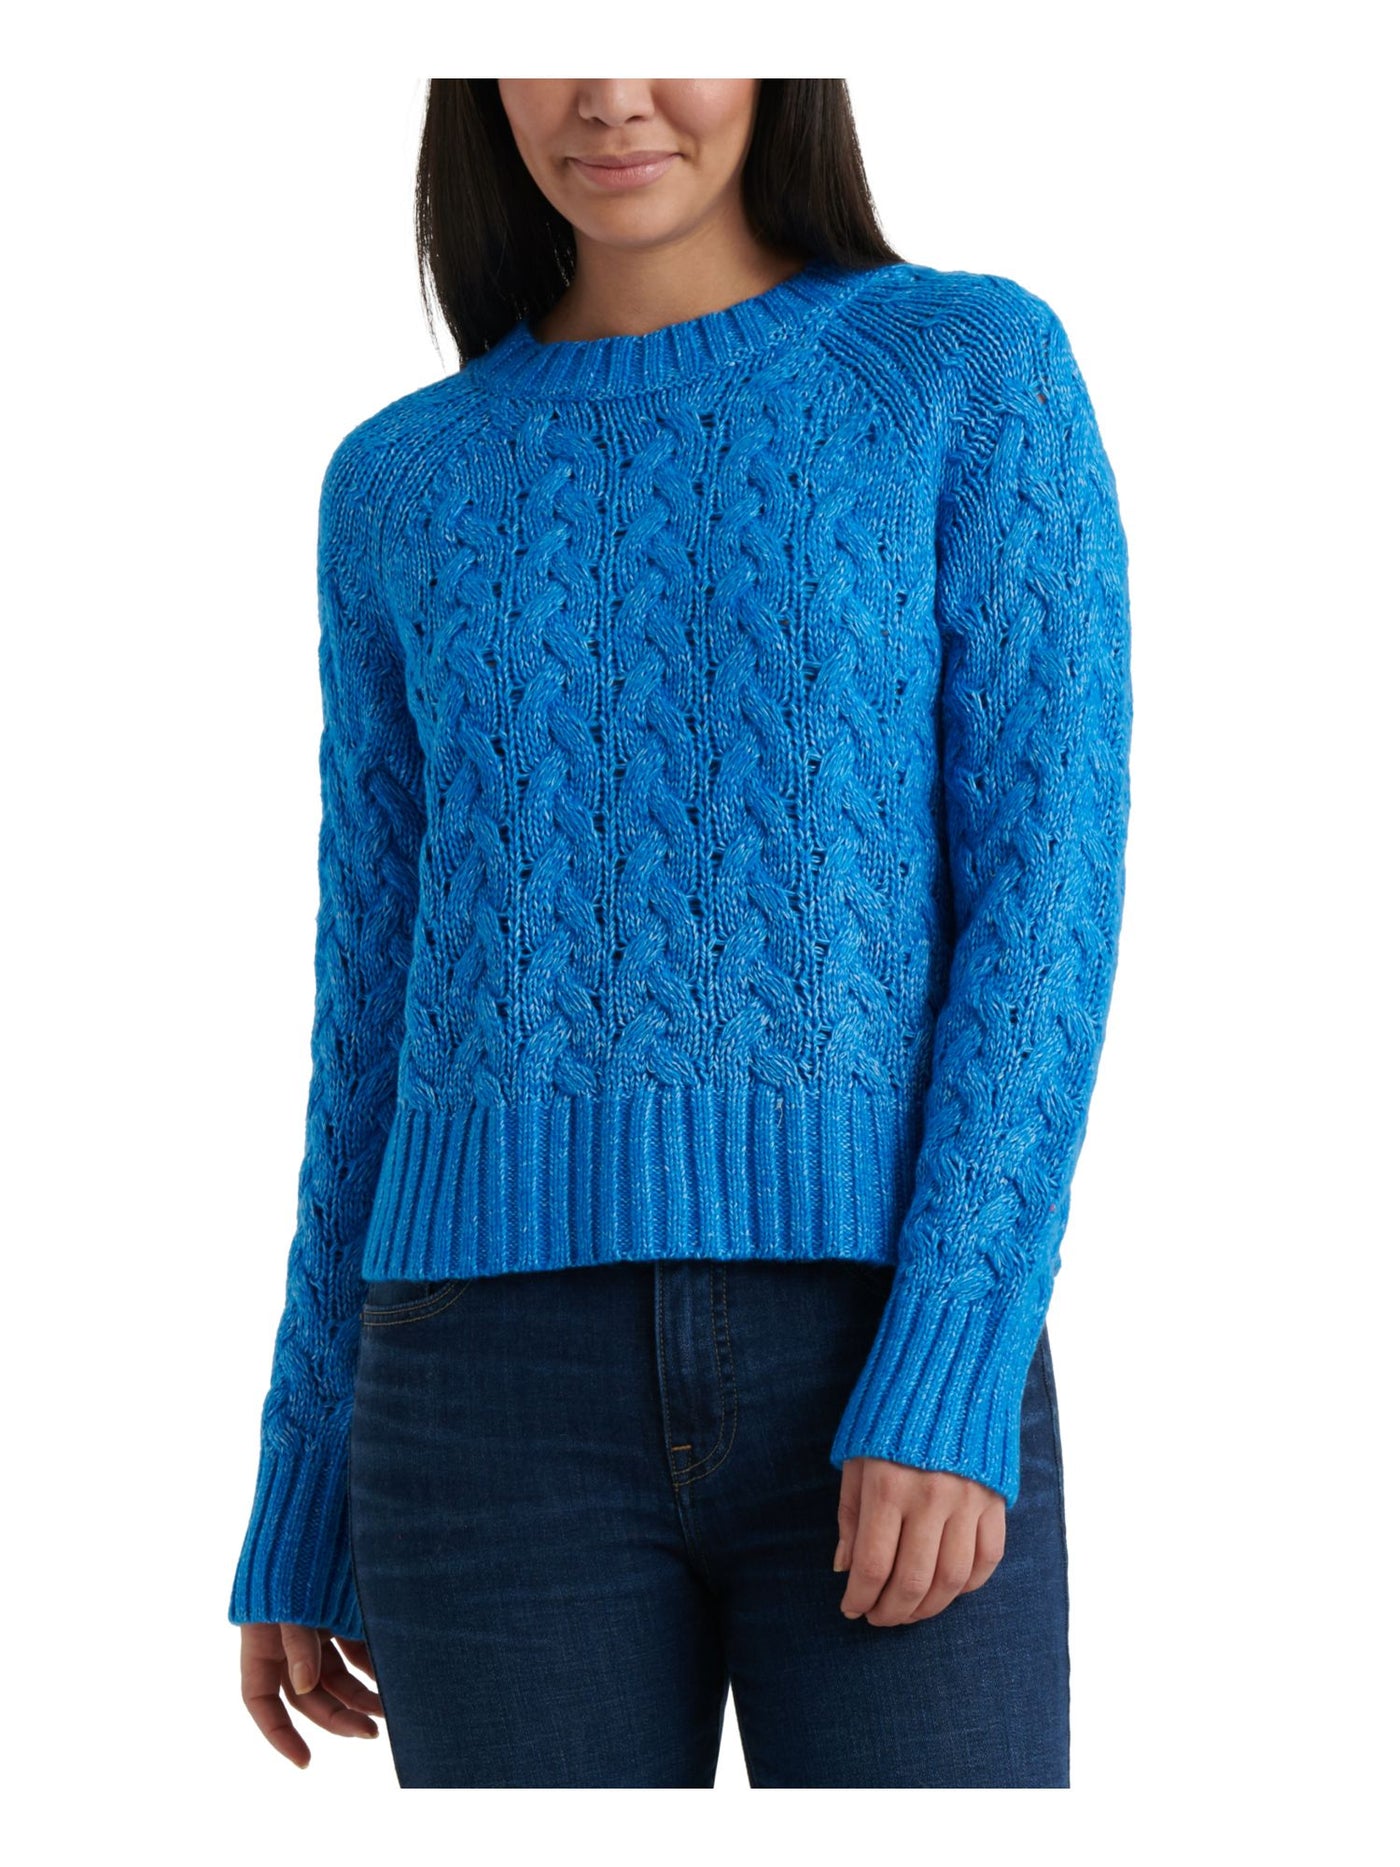 LUCKY BRAND Womens Blue Cable Knit Long Sleeve Crew Neck T-Shirt L